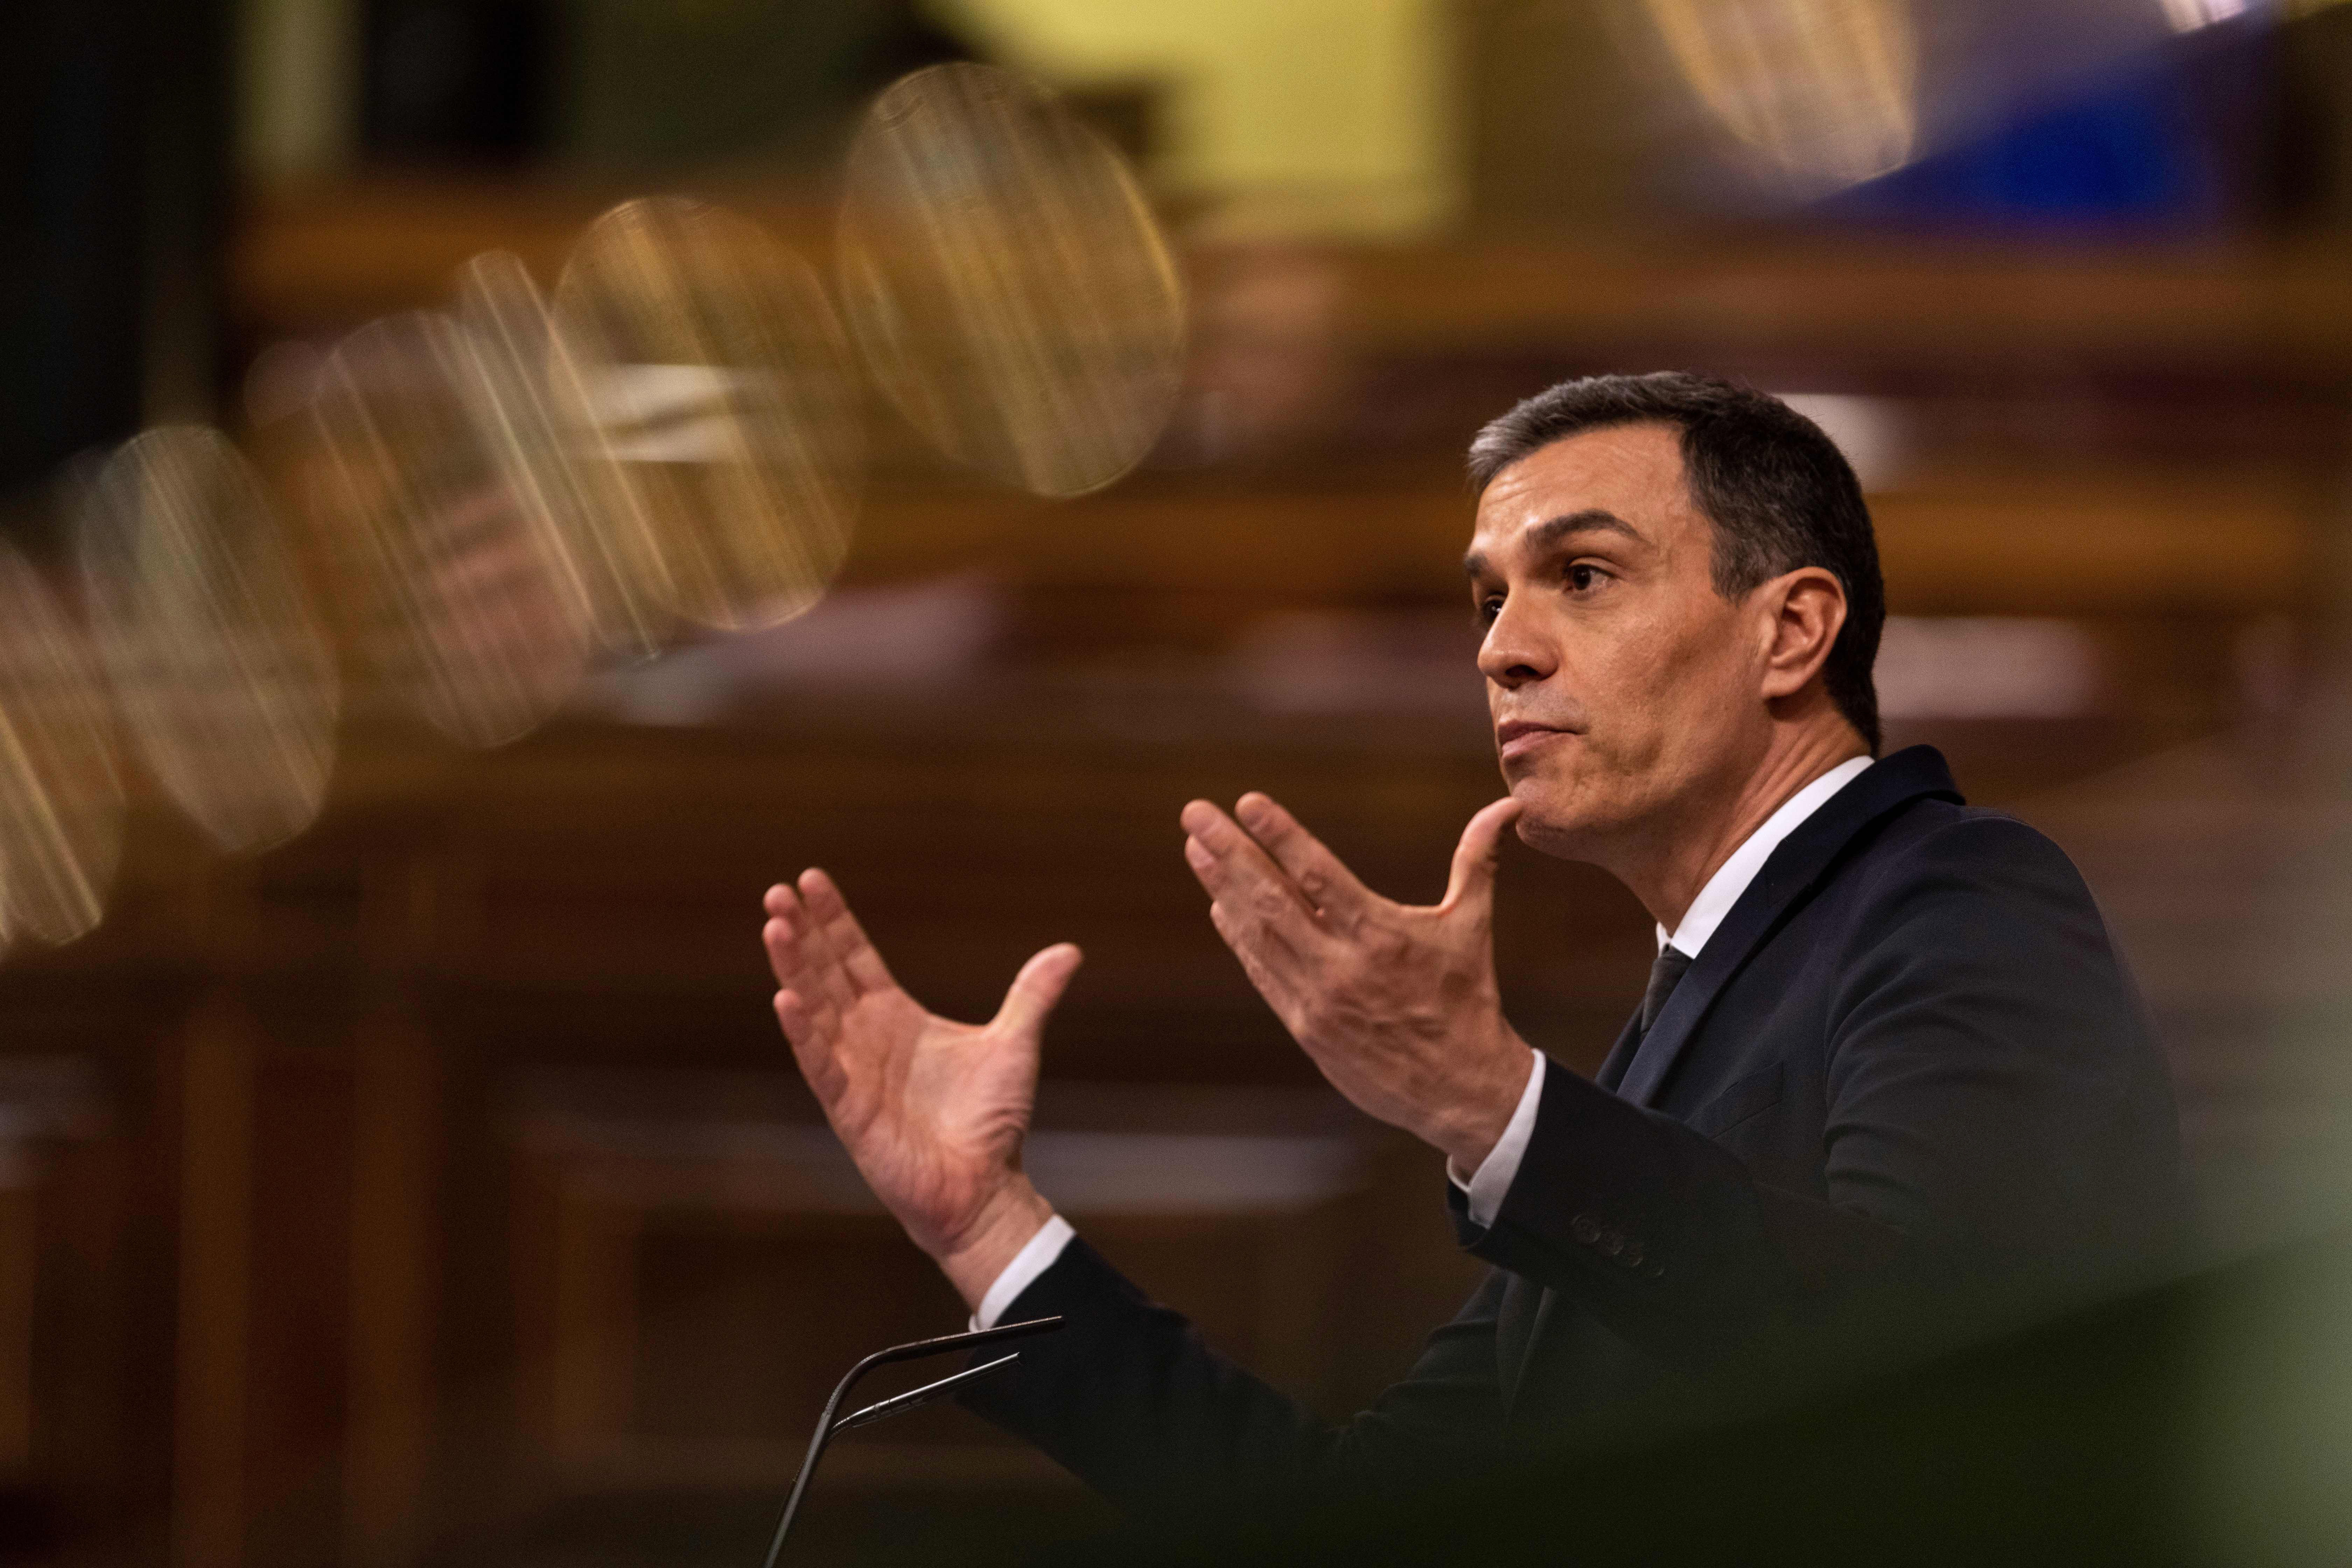 Pedro Sánchez, Prime Minister of Spain, addresses a parliamentary plenary session in Madrid on June 3.